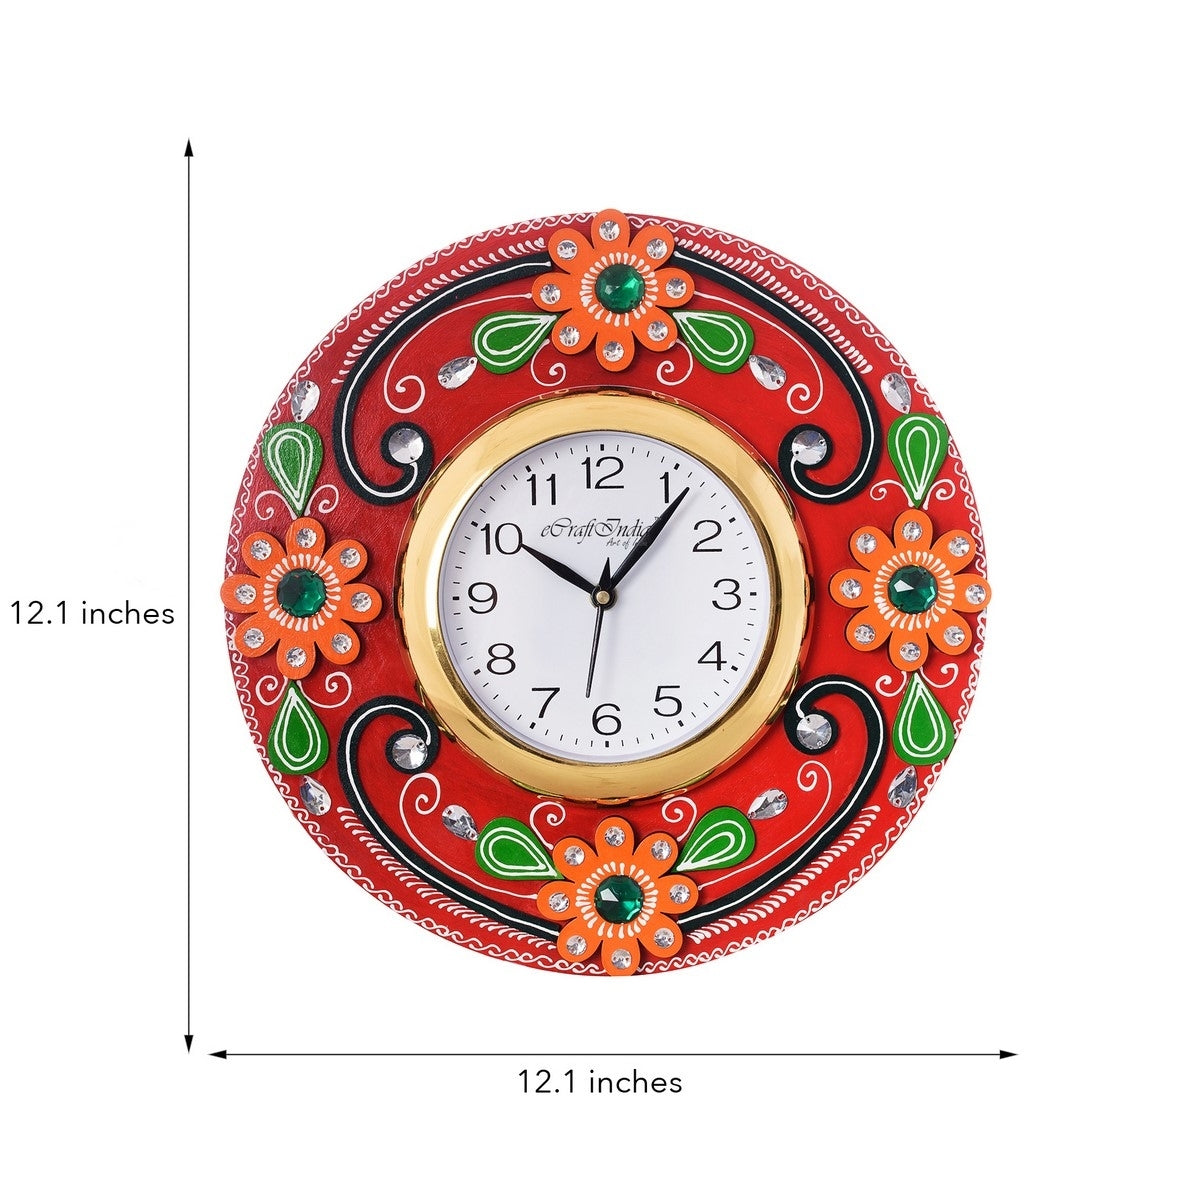 Crystal Studded Floral Papier-Mache Wooden Handcrafted Wall Clock 2